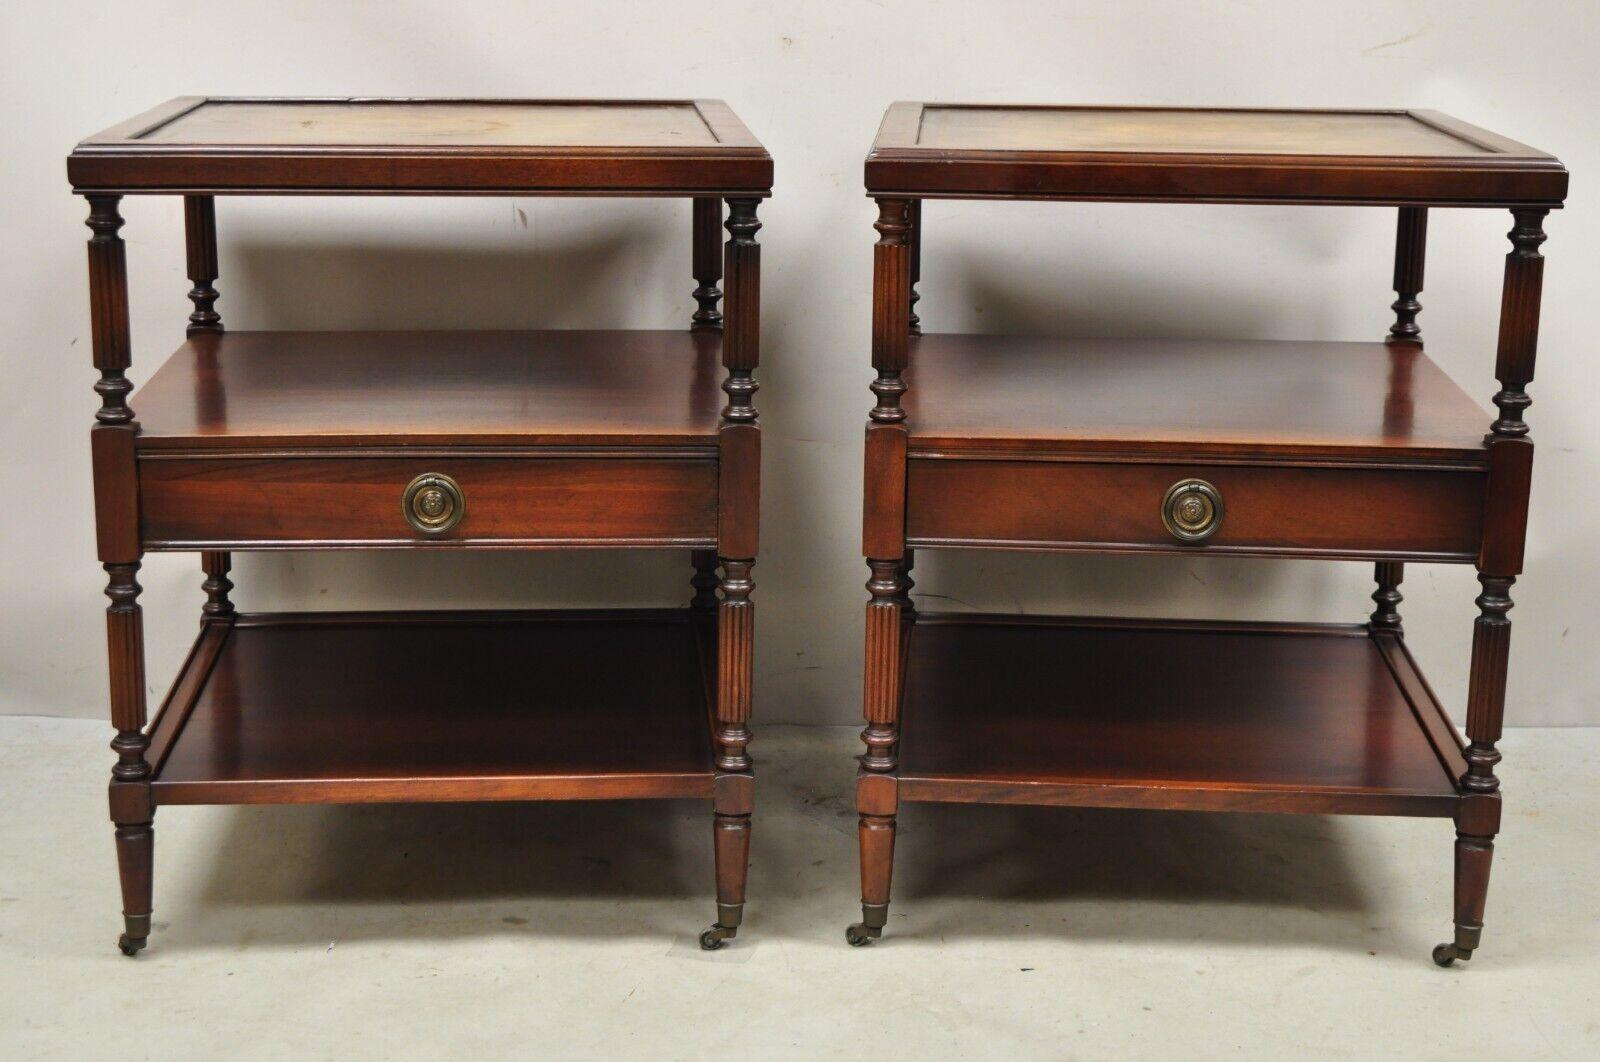 Vintage Georgian Style 3 Tier Leather Top Mahogany End Tables w/ Drawer - a Pair. Item features 3 tiers, tooled leather top, brass rolling casters, 1 dovetailed drawer, very nice vintage set. Mid 20th Century. Measurements: 26.5